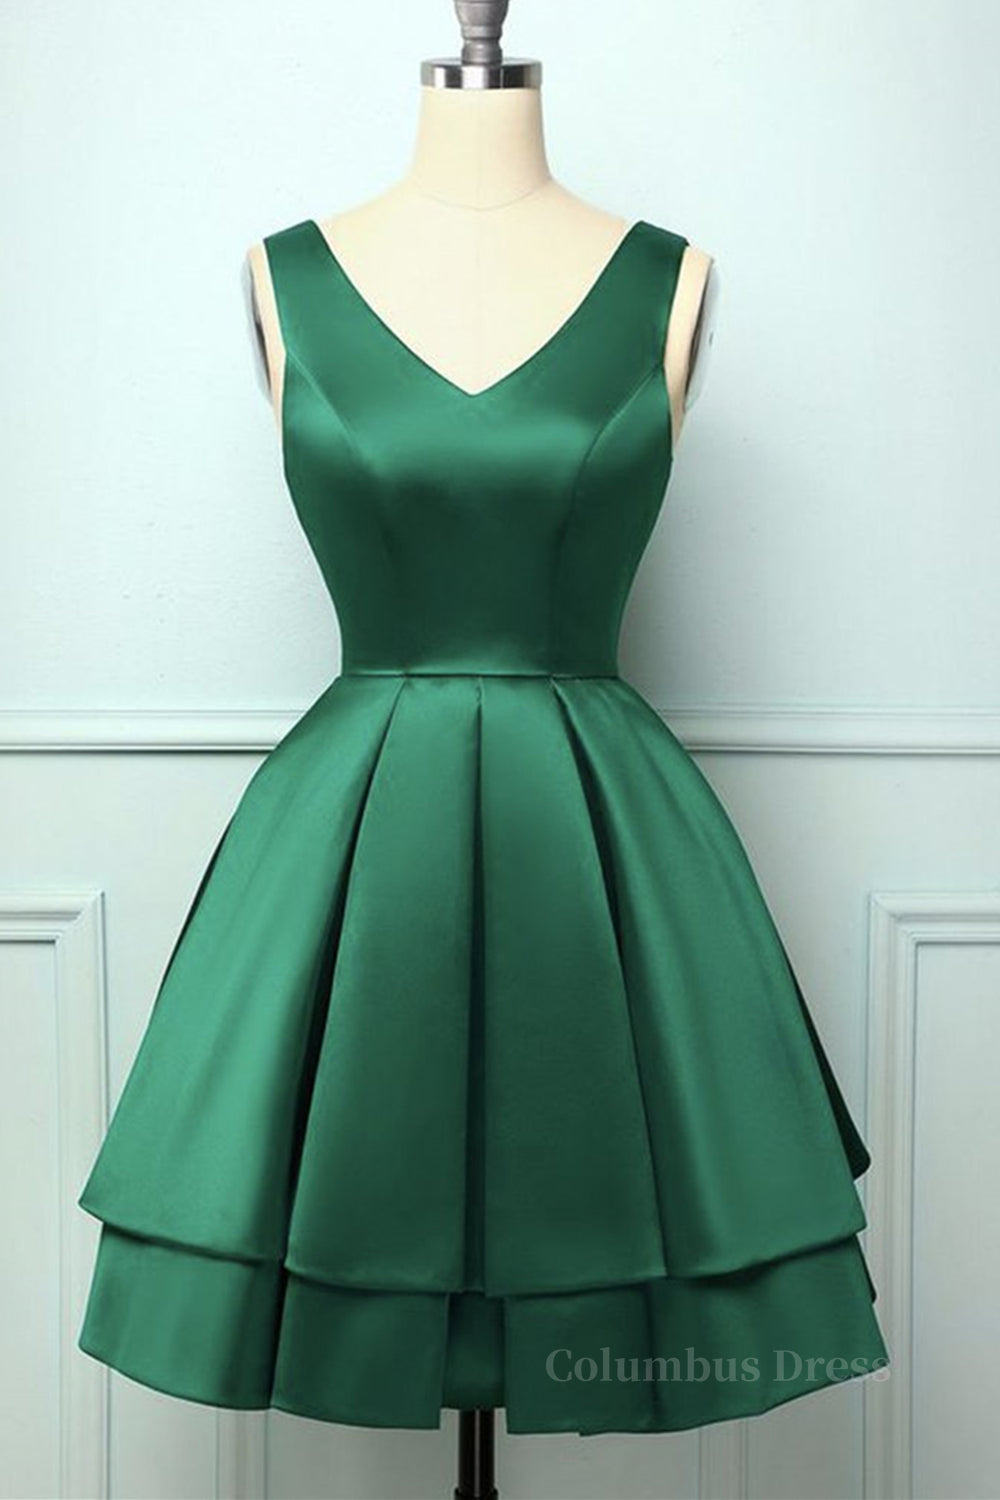 Cute V Neck and V Back Layered Green Short Corset Prom Dress, Short Green Corset Homecoming Dress, Green Corset Formal Evening Dress outfit, Evening Dresses For Wedding